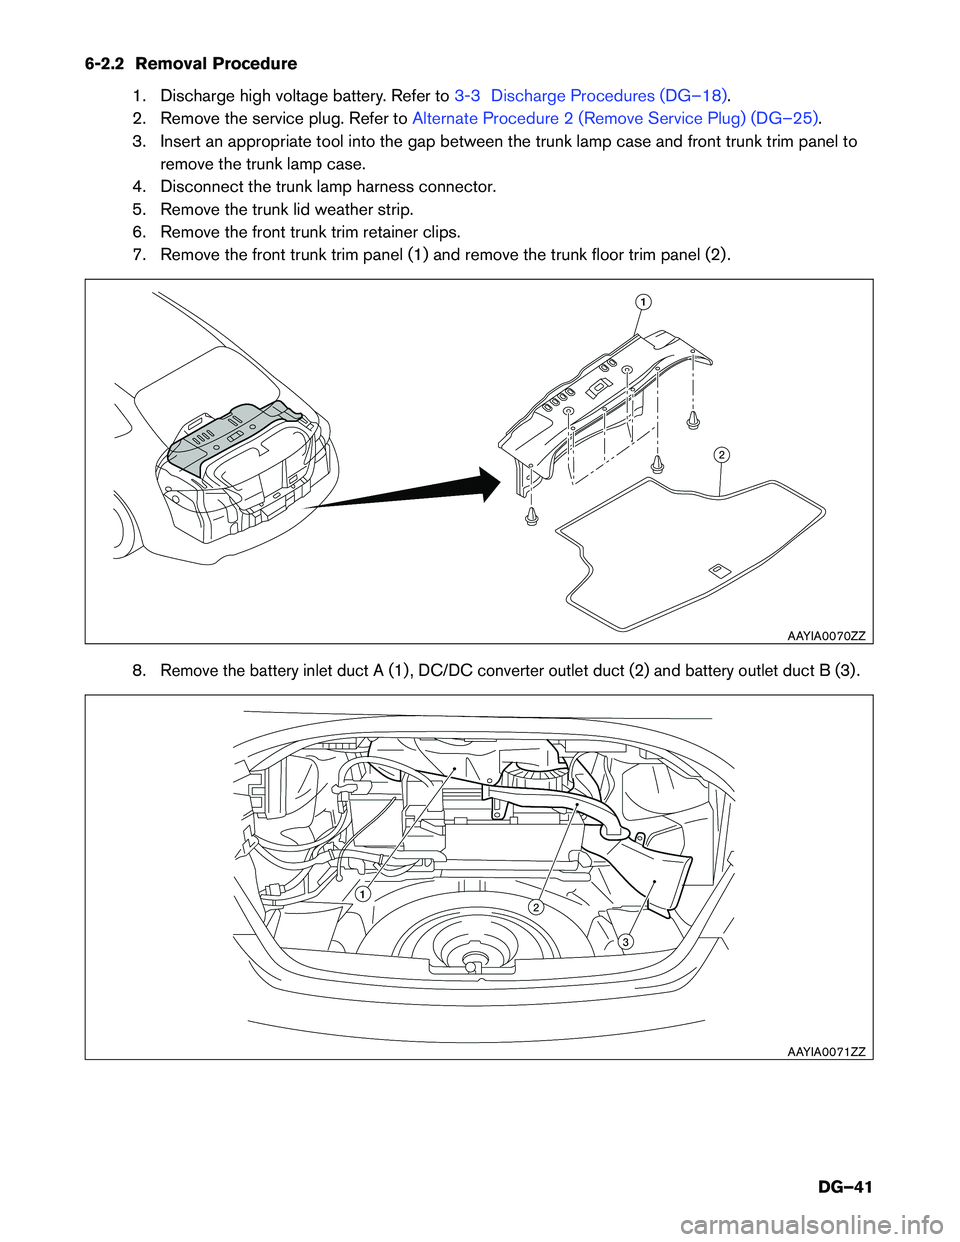 INFINITI Q70 HYBRID 2016  Dismantling Guide 6-2.2 Removal Procedure1. Discharge high voltage battery. Refer to
3-3 Discharge Procedures (DG–18).
2. Remove the service plug. Refer to
Alternate Procedure 2 (Remove Service Plug) (DG–25).
3. In